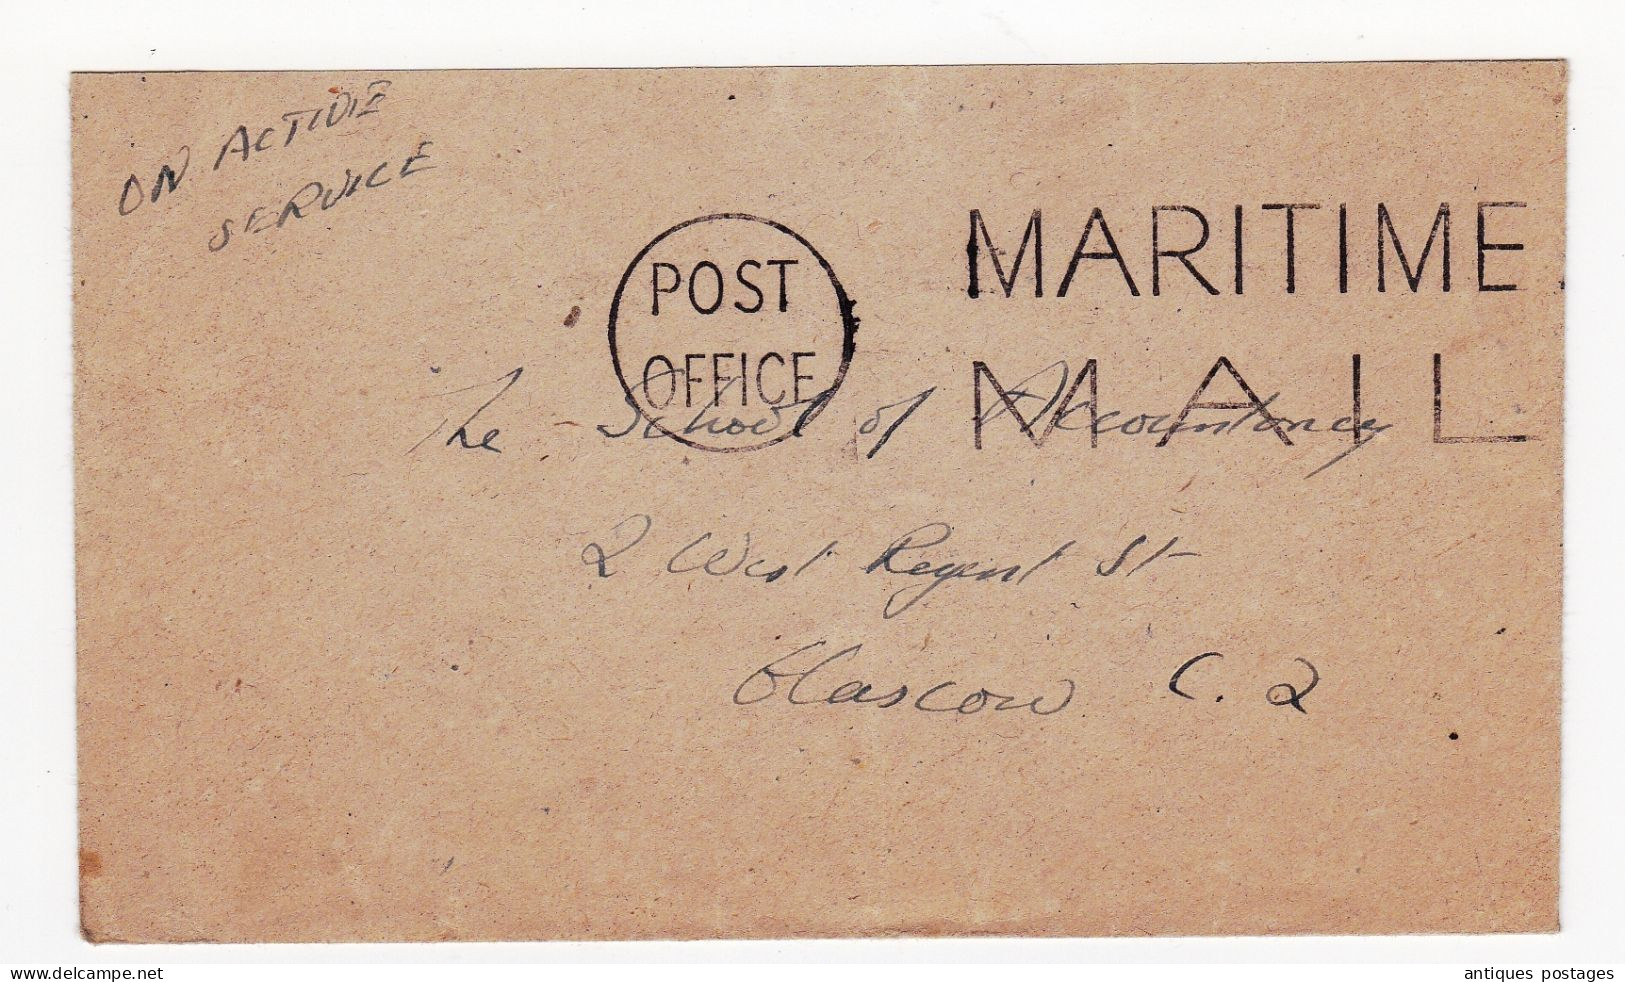 WW2 Post Office Maritime Mail On Active Service United Kingdom Royal Navy Glasgow Scotland - Postmark Collection